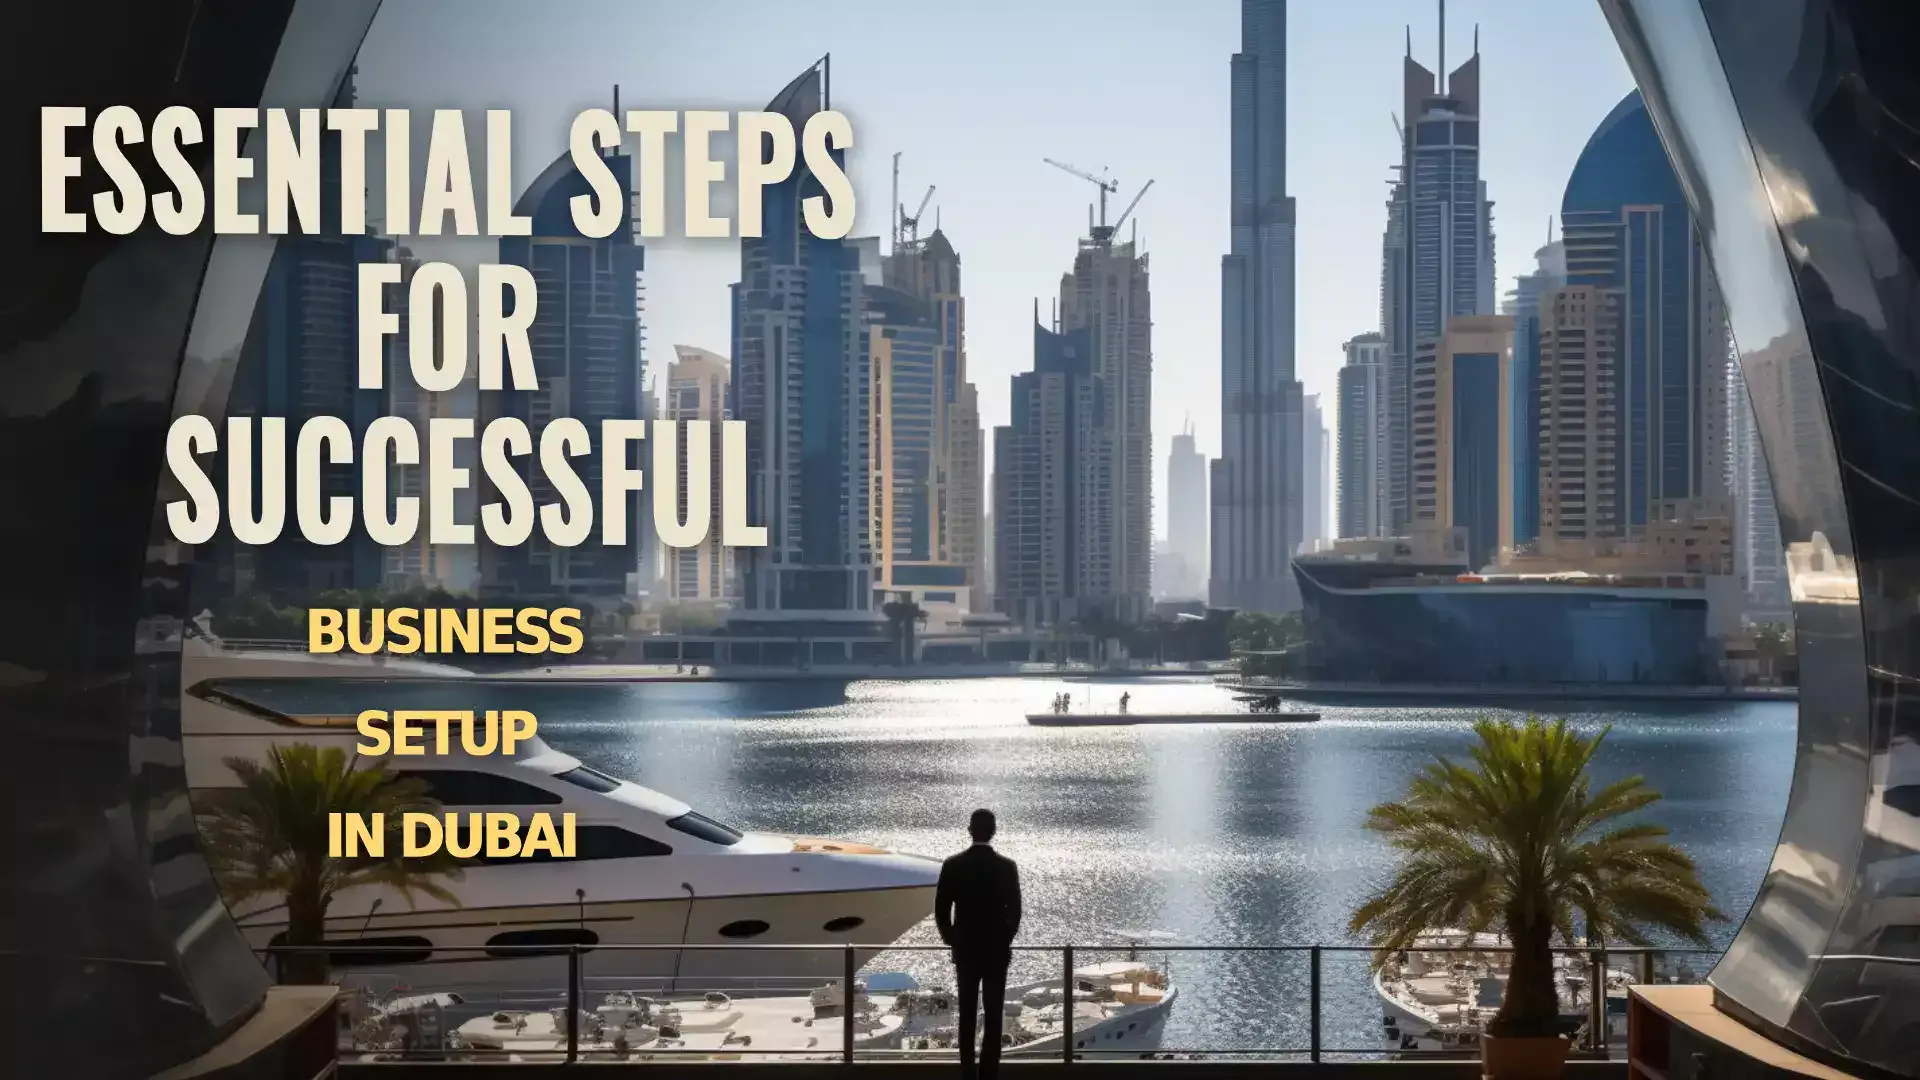 Dynamic Business Environment in Dubai - Catalyst for Success